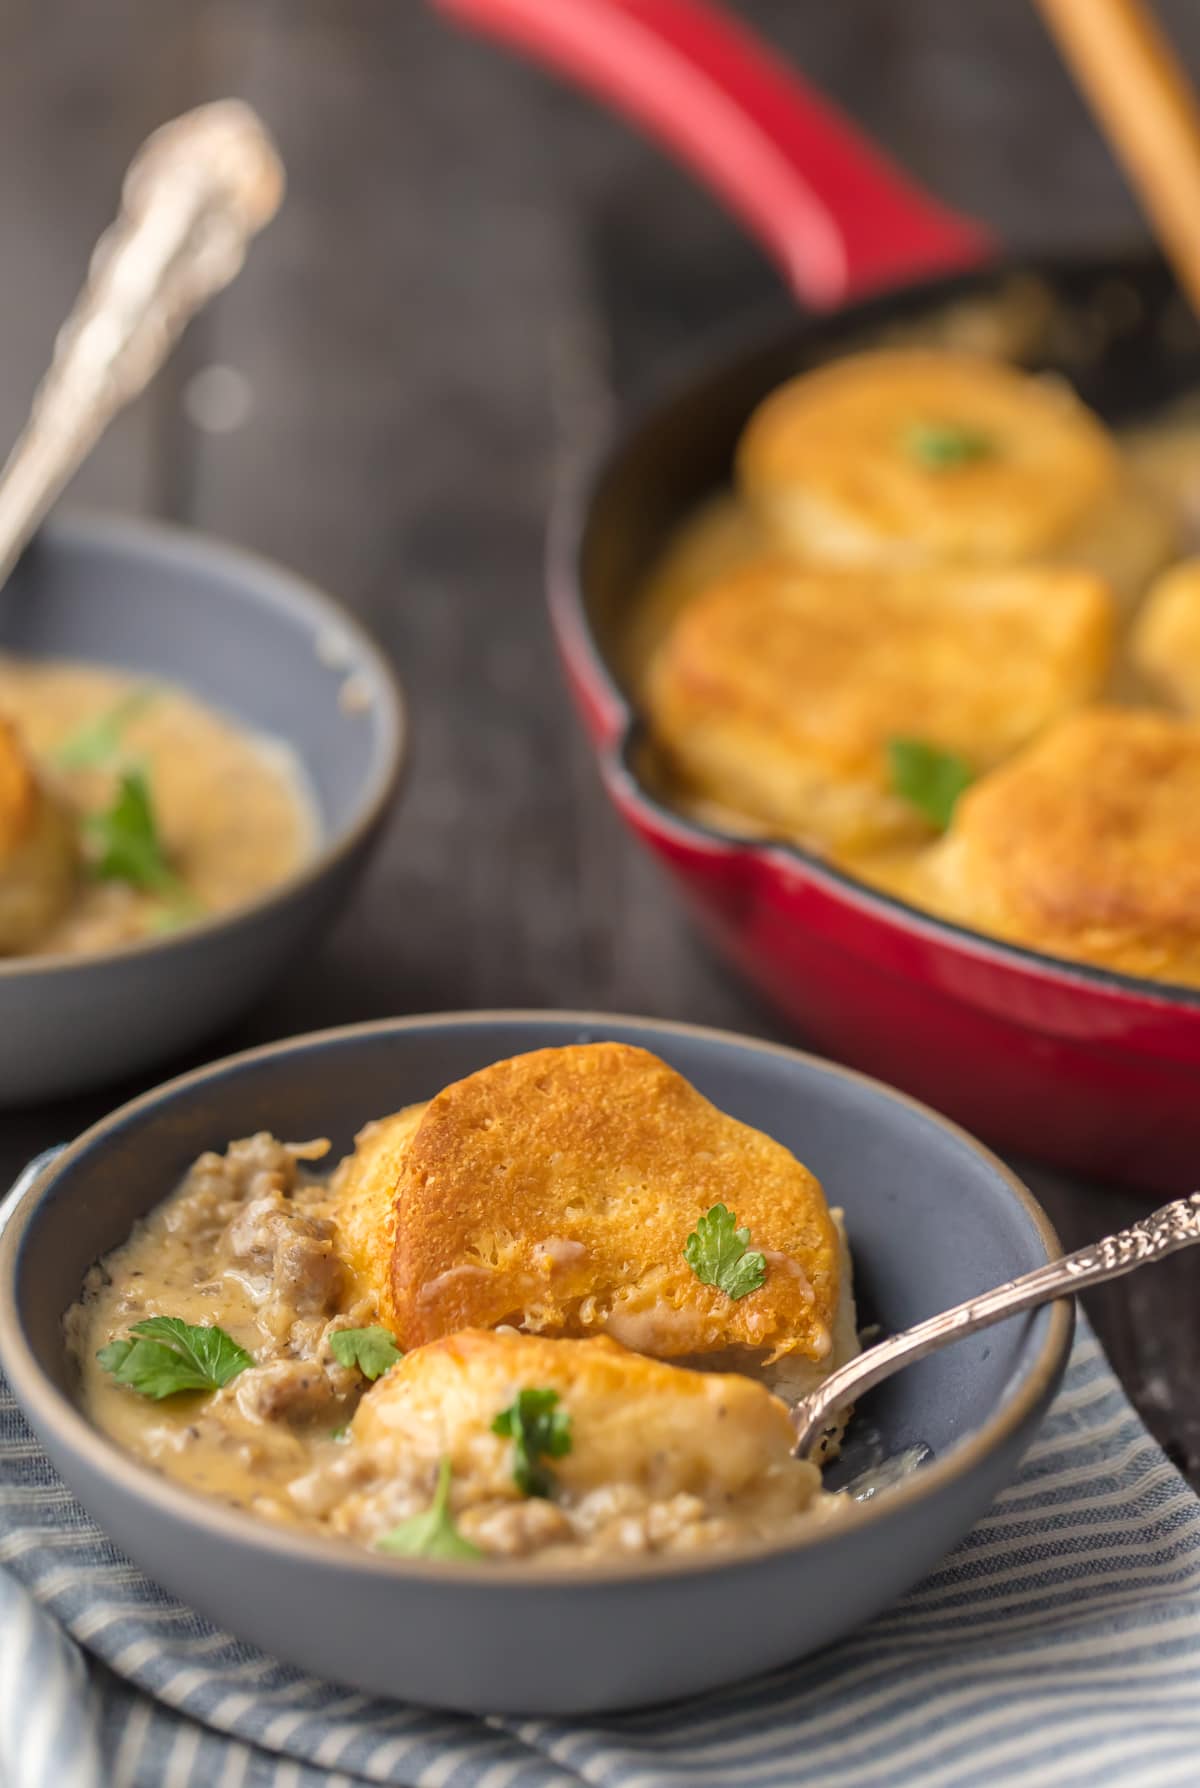 Sausage and biscuits with gravy in a bowl